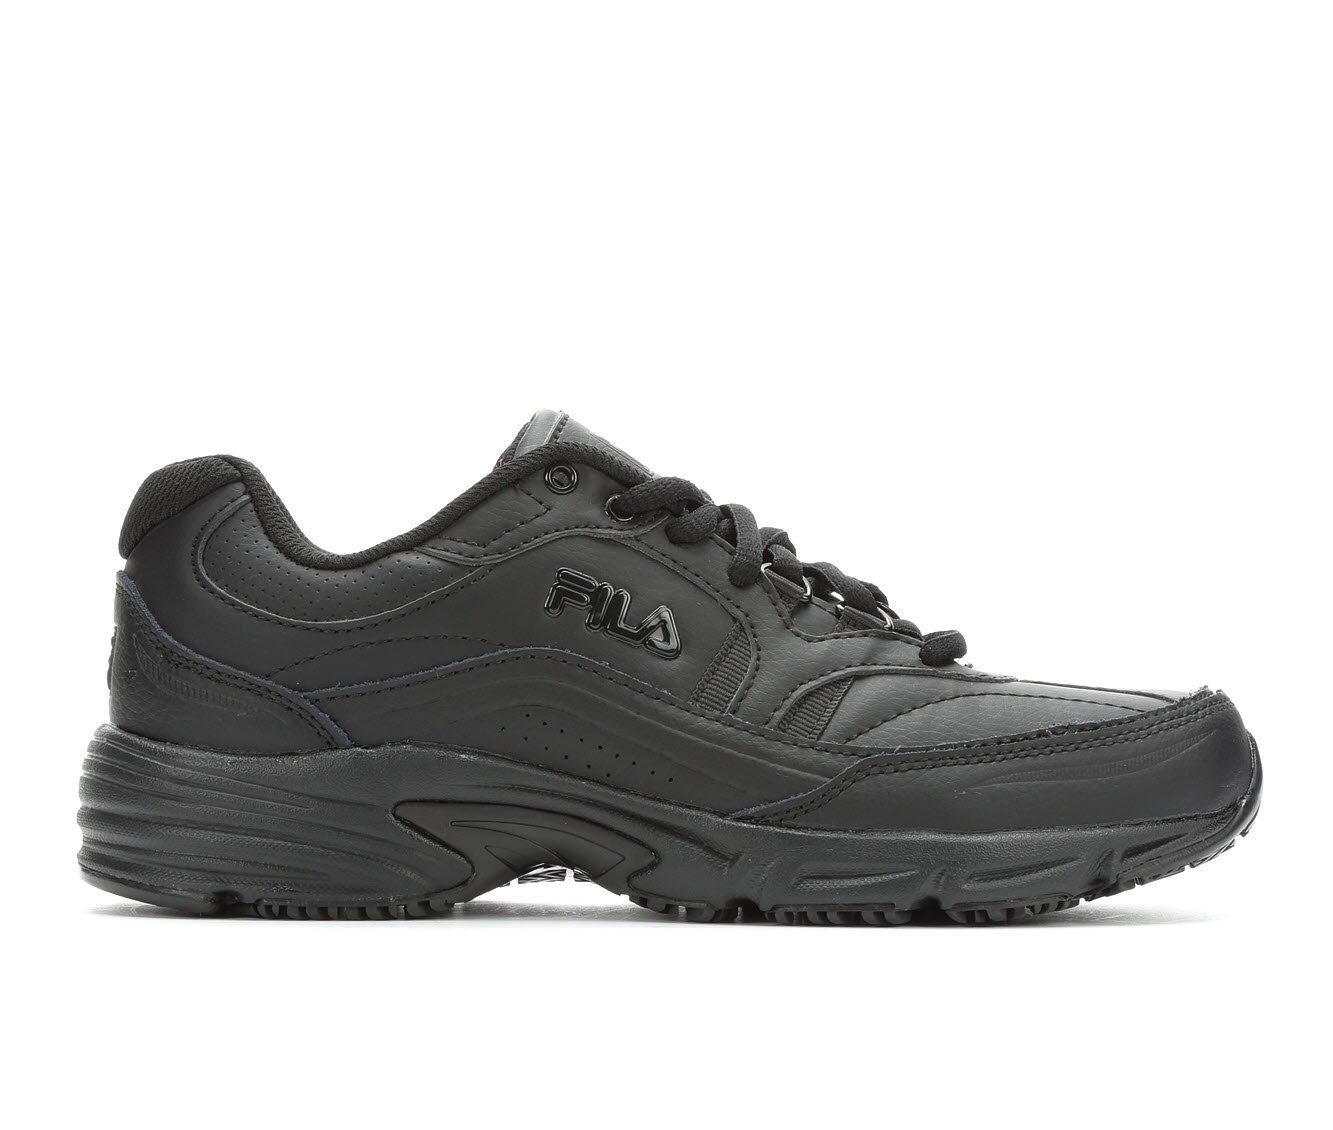 Men's Fila Work Boots and Safety Shoes | Shoe Carnival